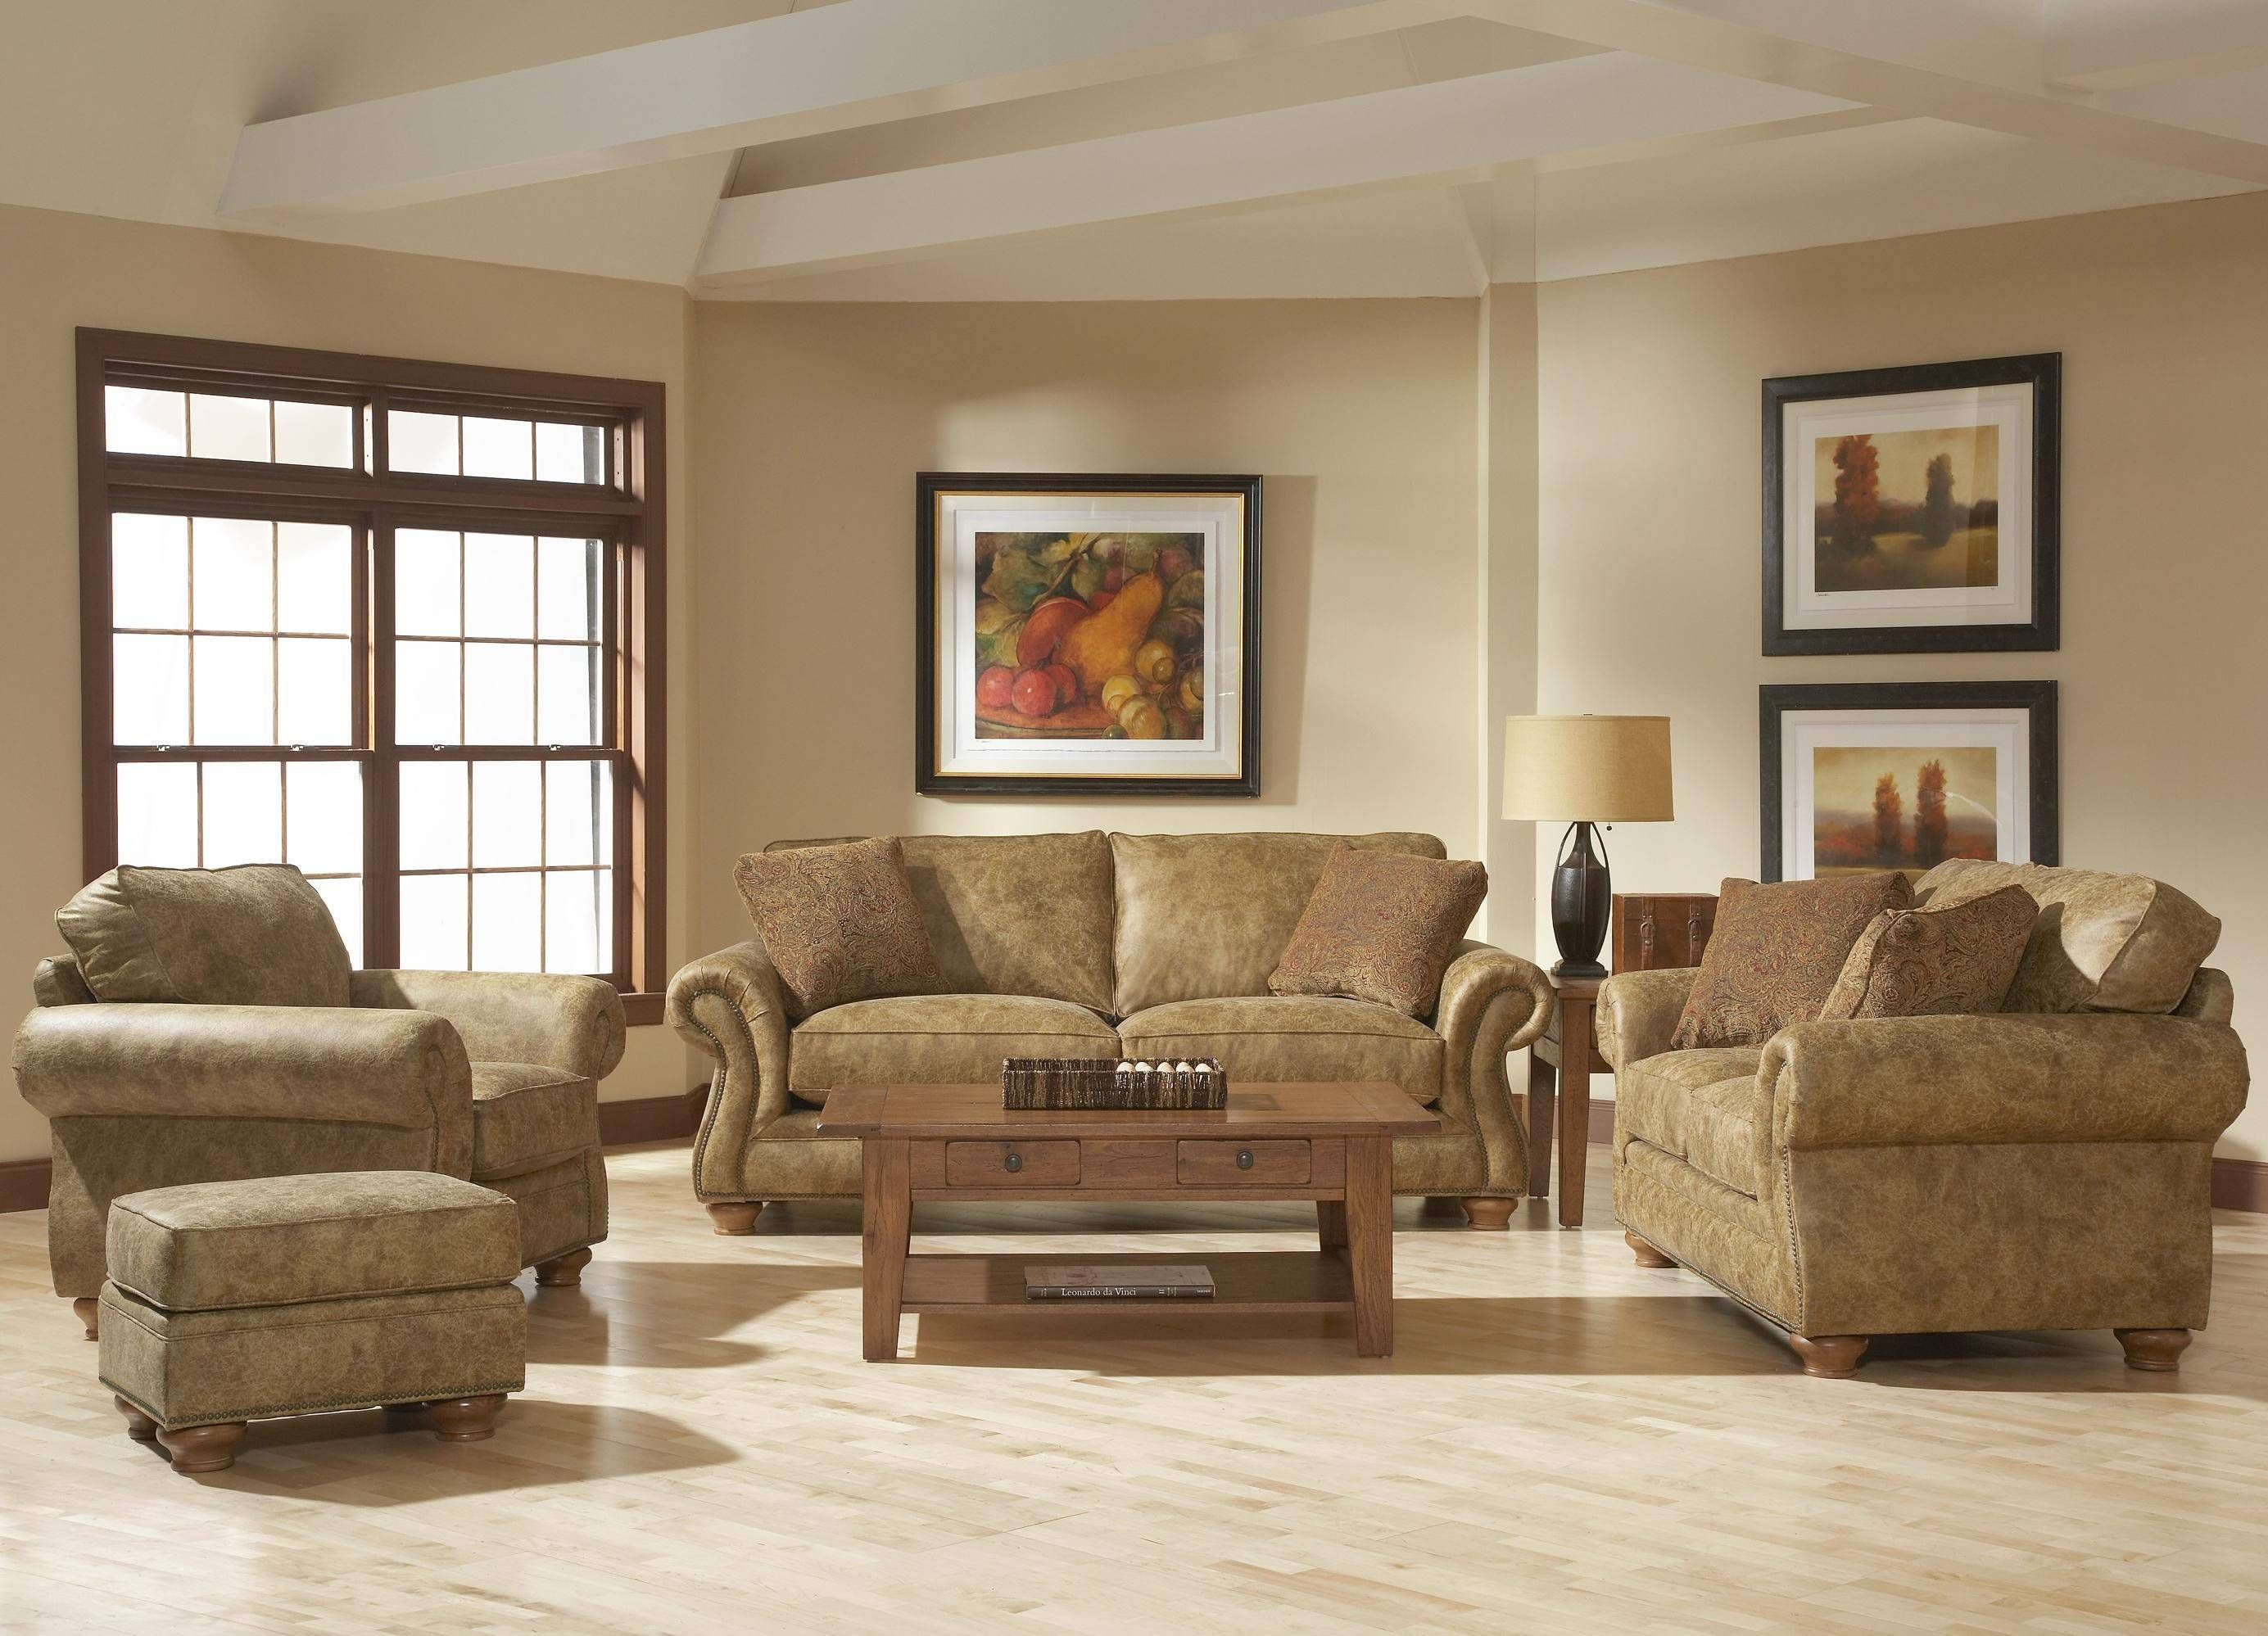 Broyhill Furniture Laramie 3 Piece Wedge Sectional Sofa – Wayside Within Broyhill Sectional Sofas (View 19 of 30)